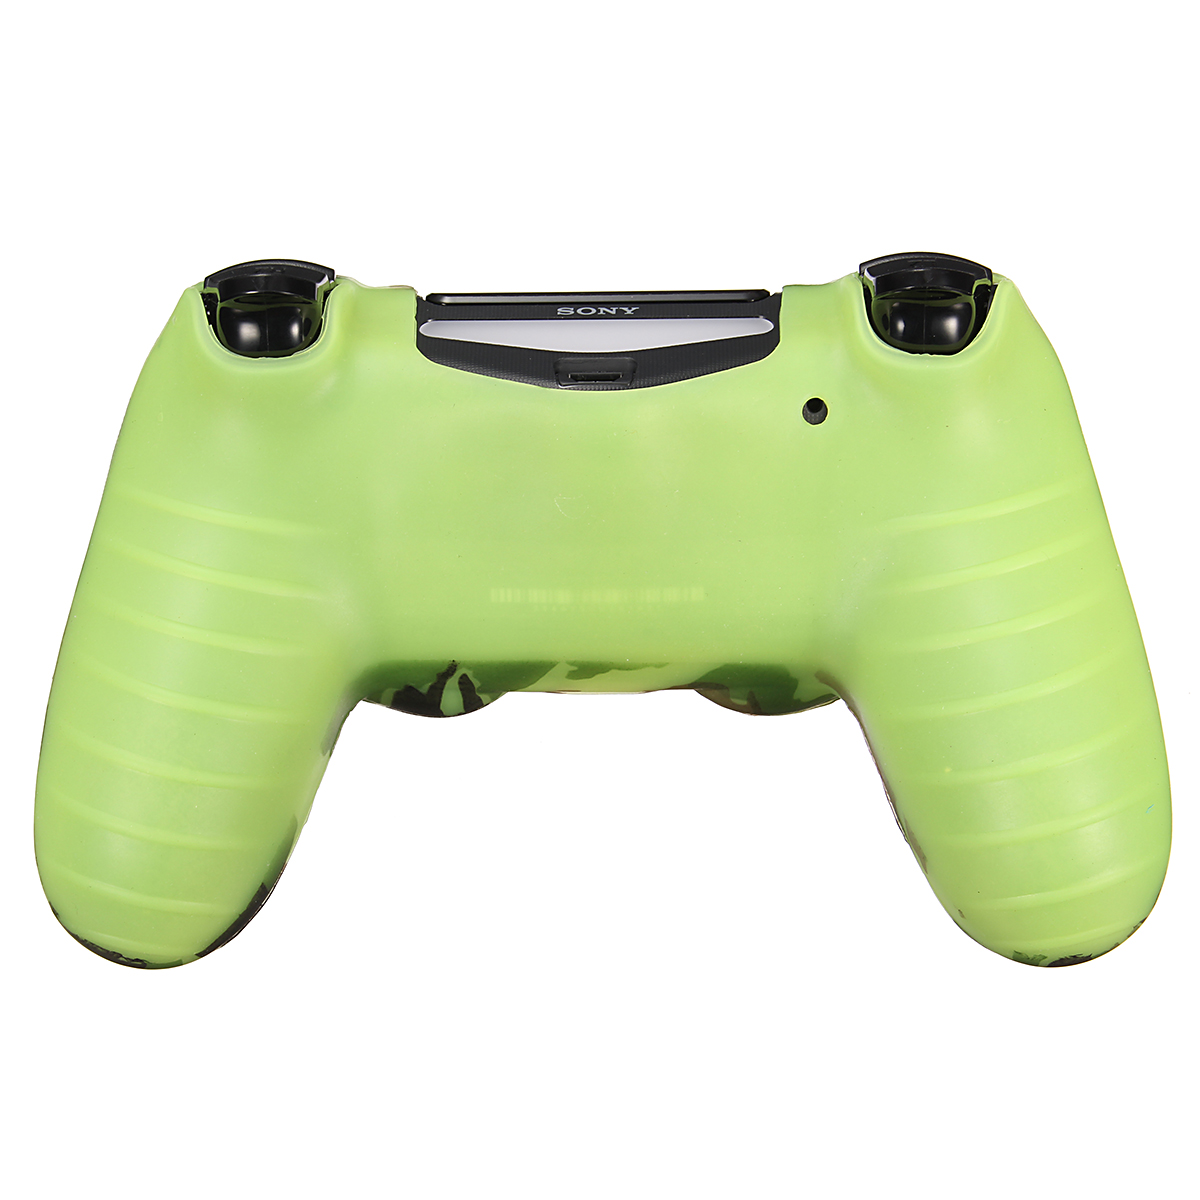 Durable Decal Camouflage Grip Cover Case Silicone Rubber Soft Skin Protector for Playstation 4 for Dualshock 4 Gamepad 49